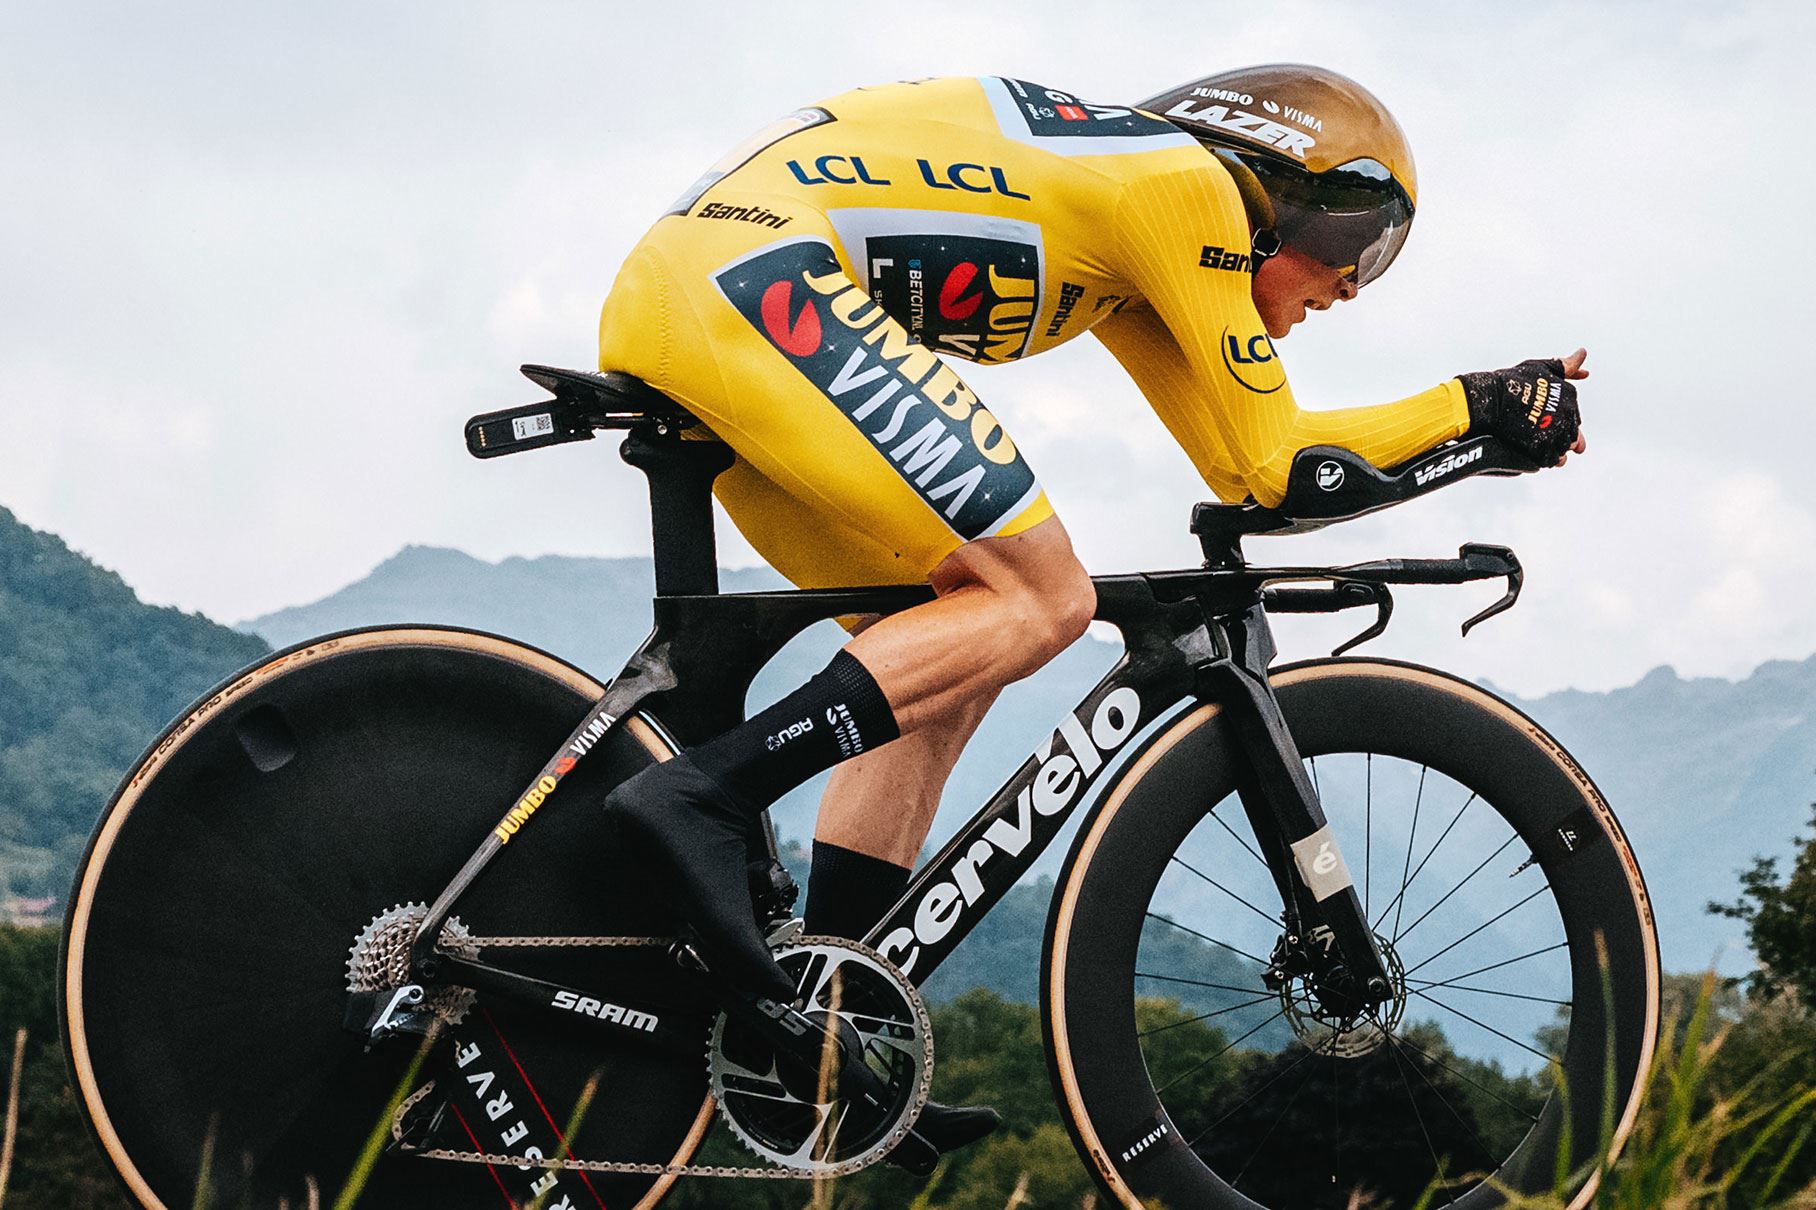 Jonas Vingegaard wins the Stage 16 ITT on a Cervelo P5 with 2x RED eTap AXS